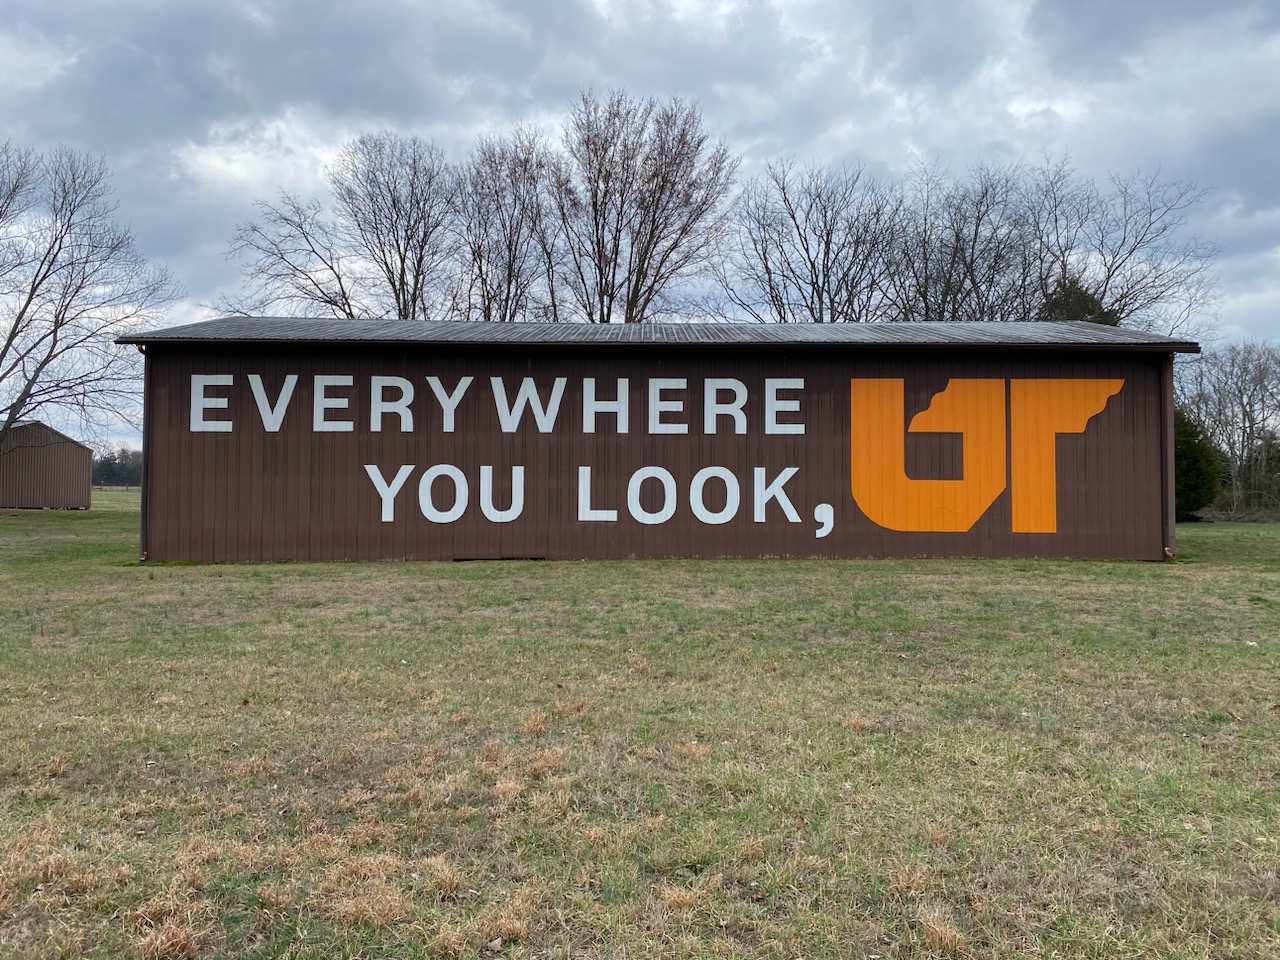 Orange and white "Everywhere You Look, UT" mural painted on brown barn